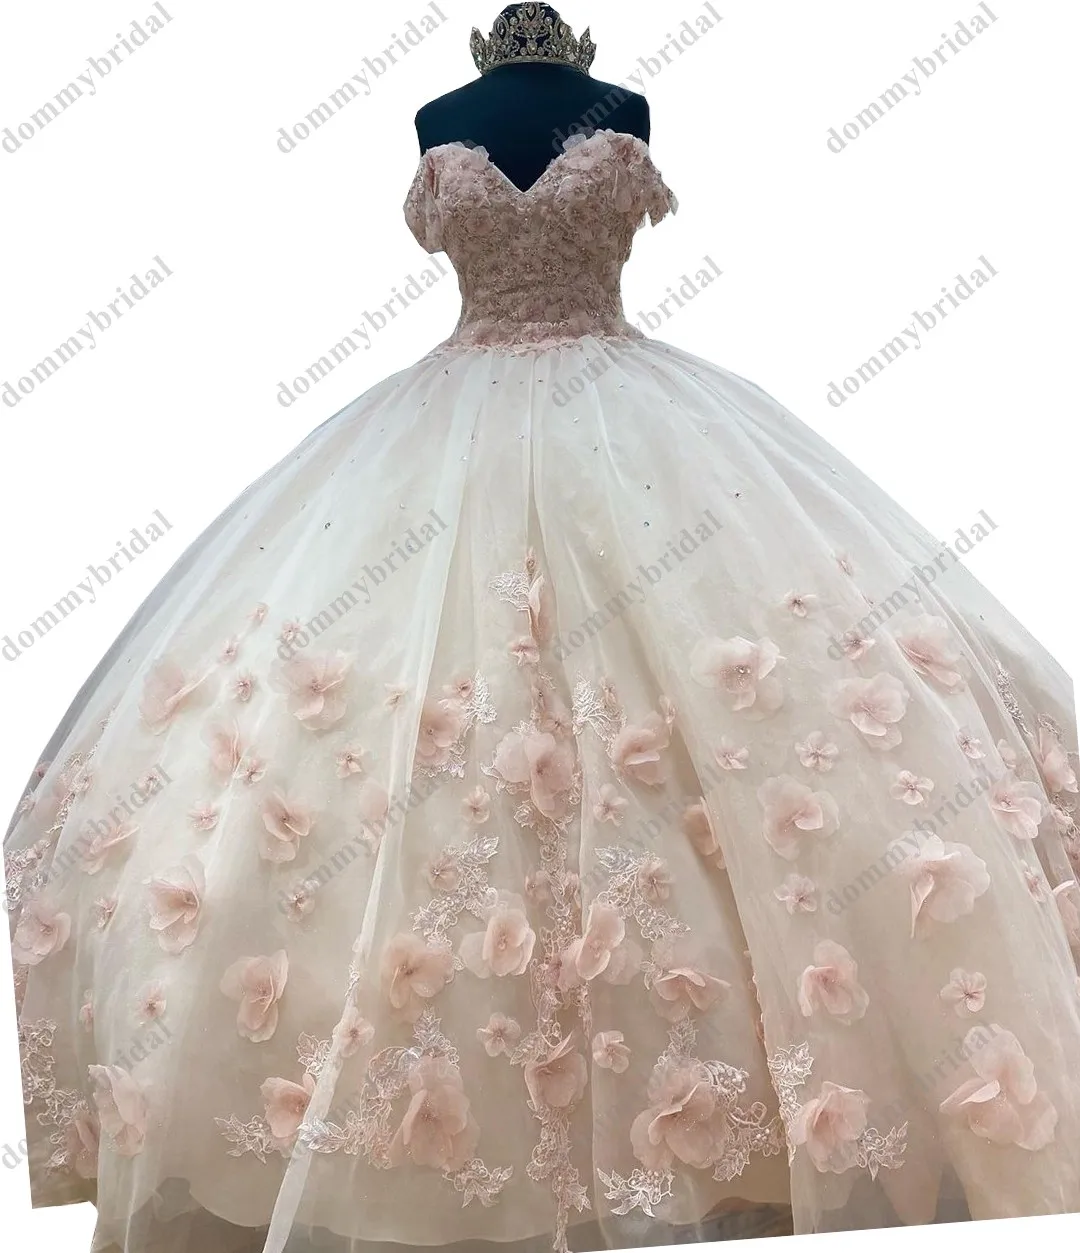 

Romantic Champagne and Blush Pink Patterned Flowers Princess Ball Gown Quinceanera Dress Lace Applique Corset Back Off Shoulder